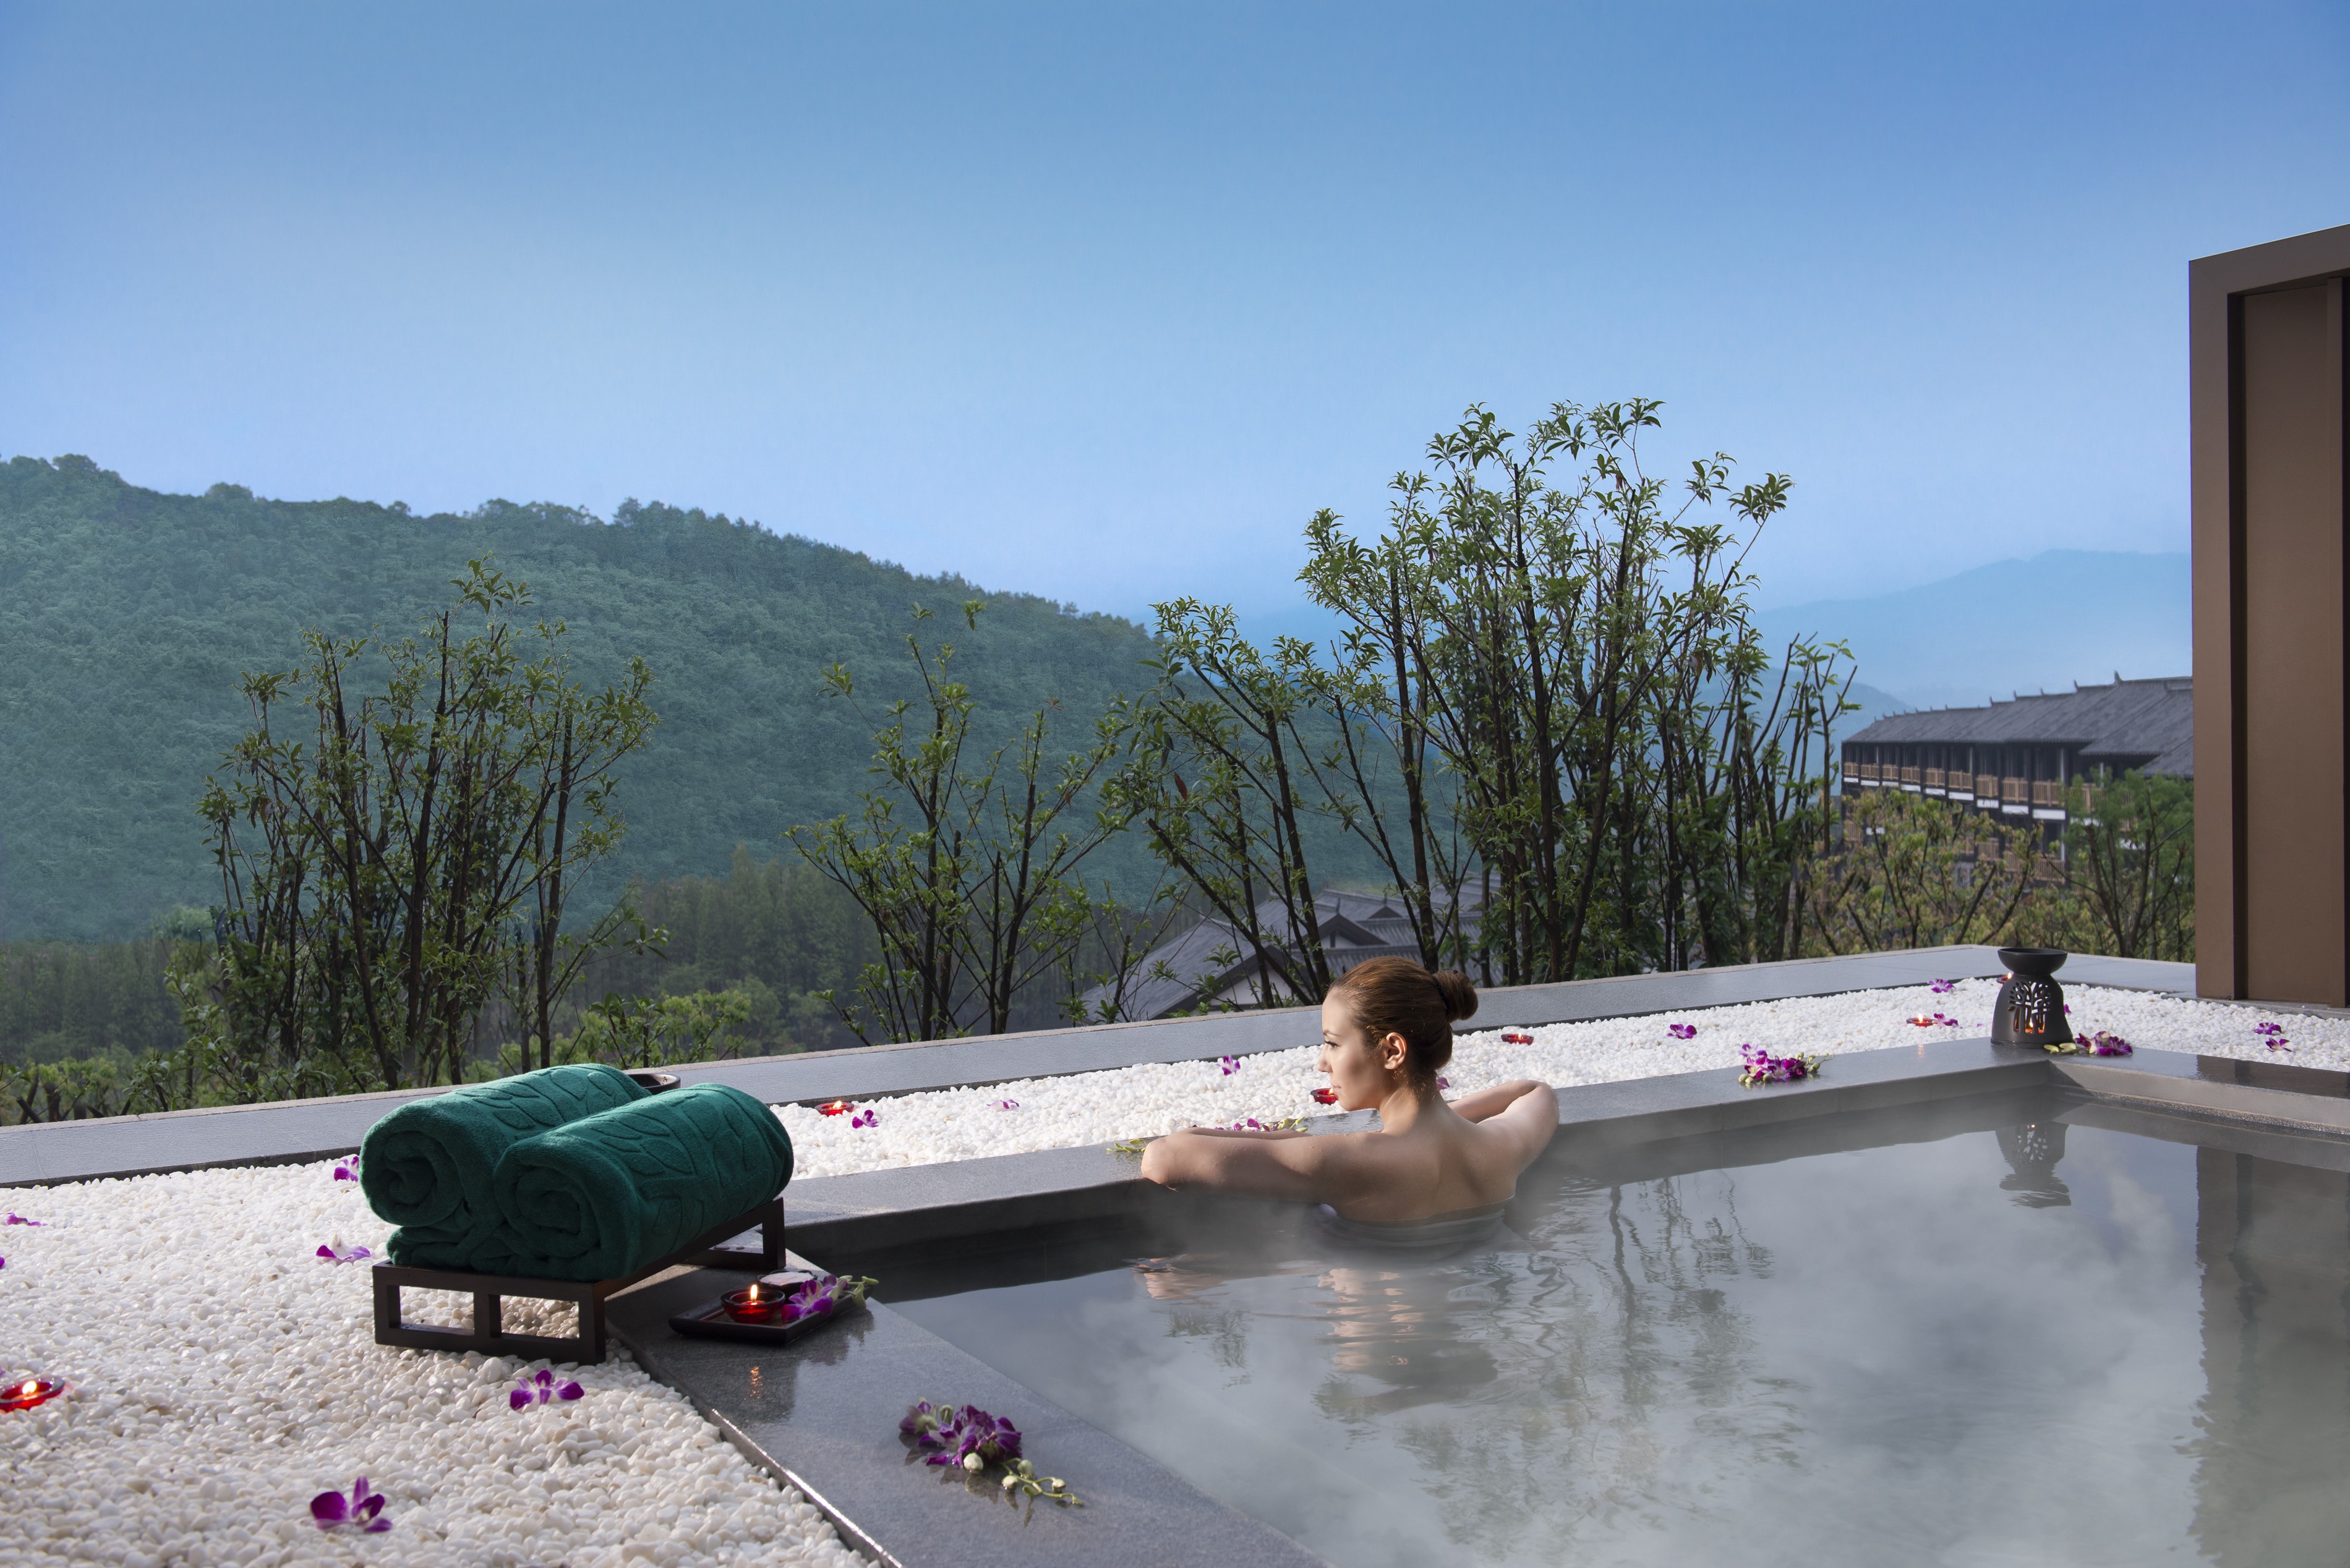 A guest relaxes in a private hot springs pool at Banyan Tree Chongqing Beibei, located in the hills near Chongqing city about a 50-minute car ride from the city’s airport.